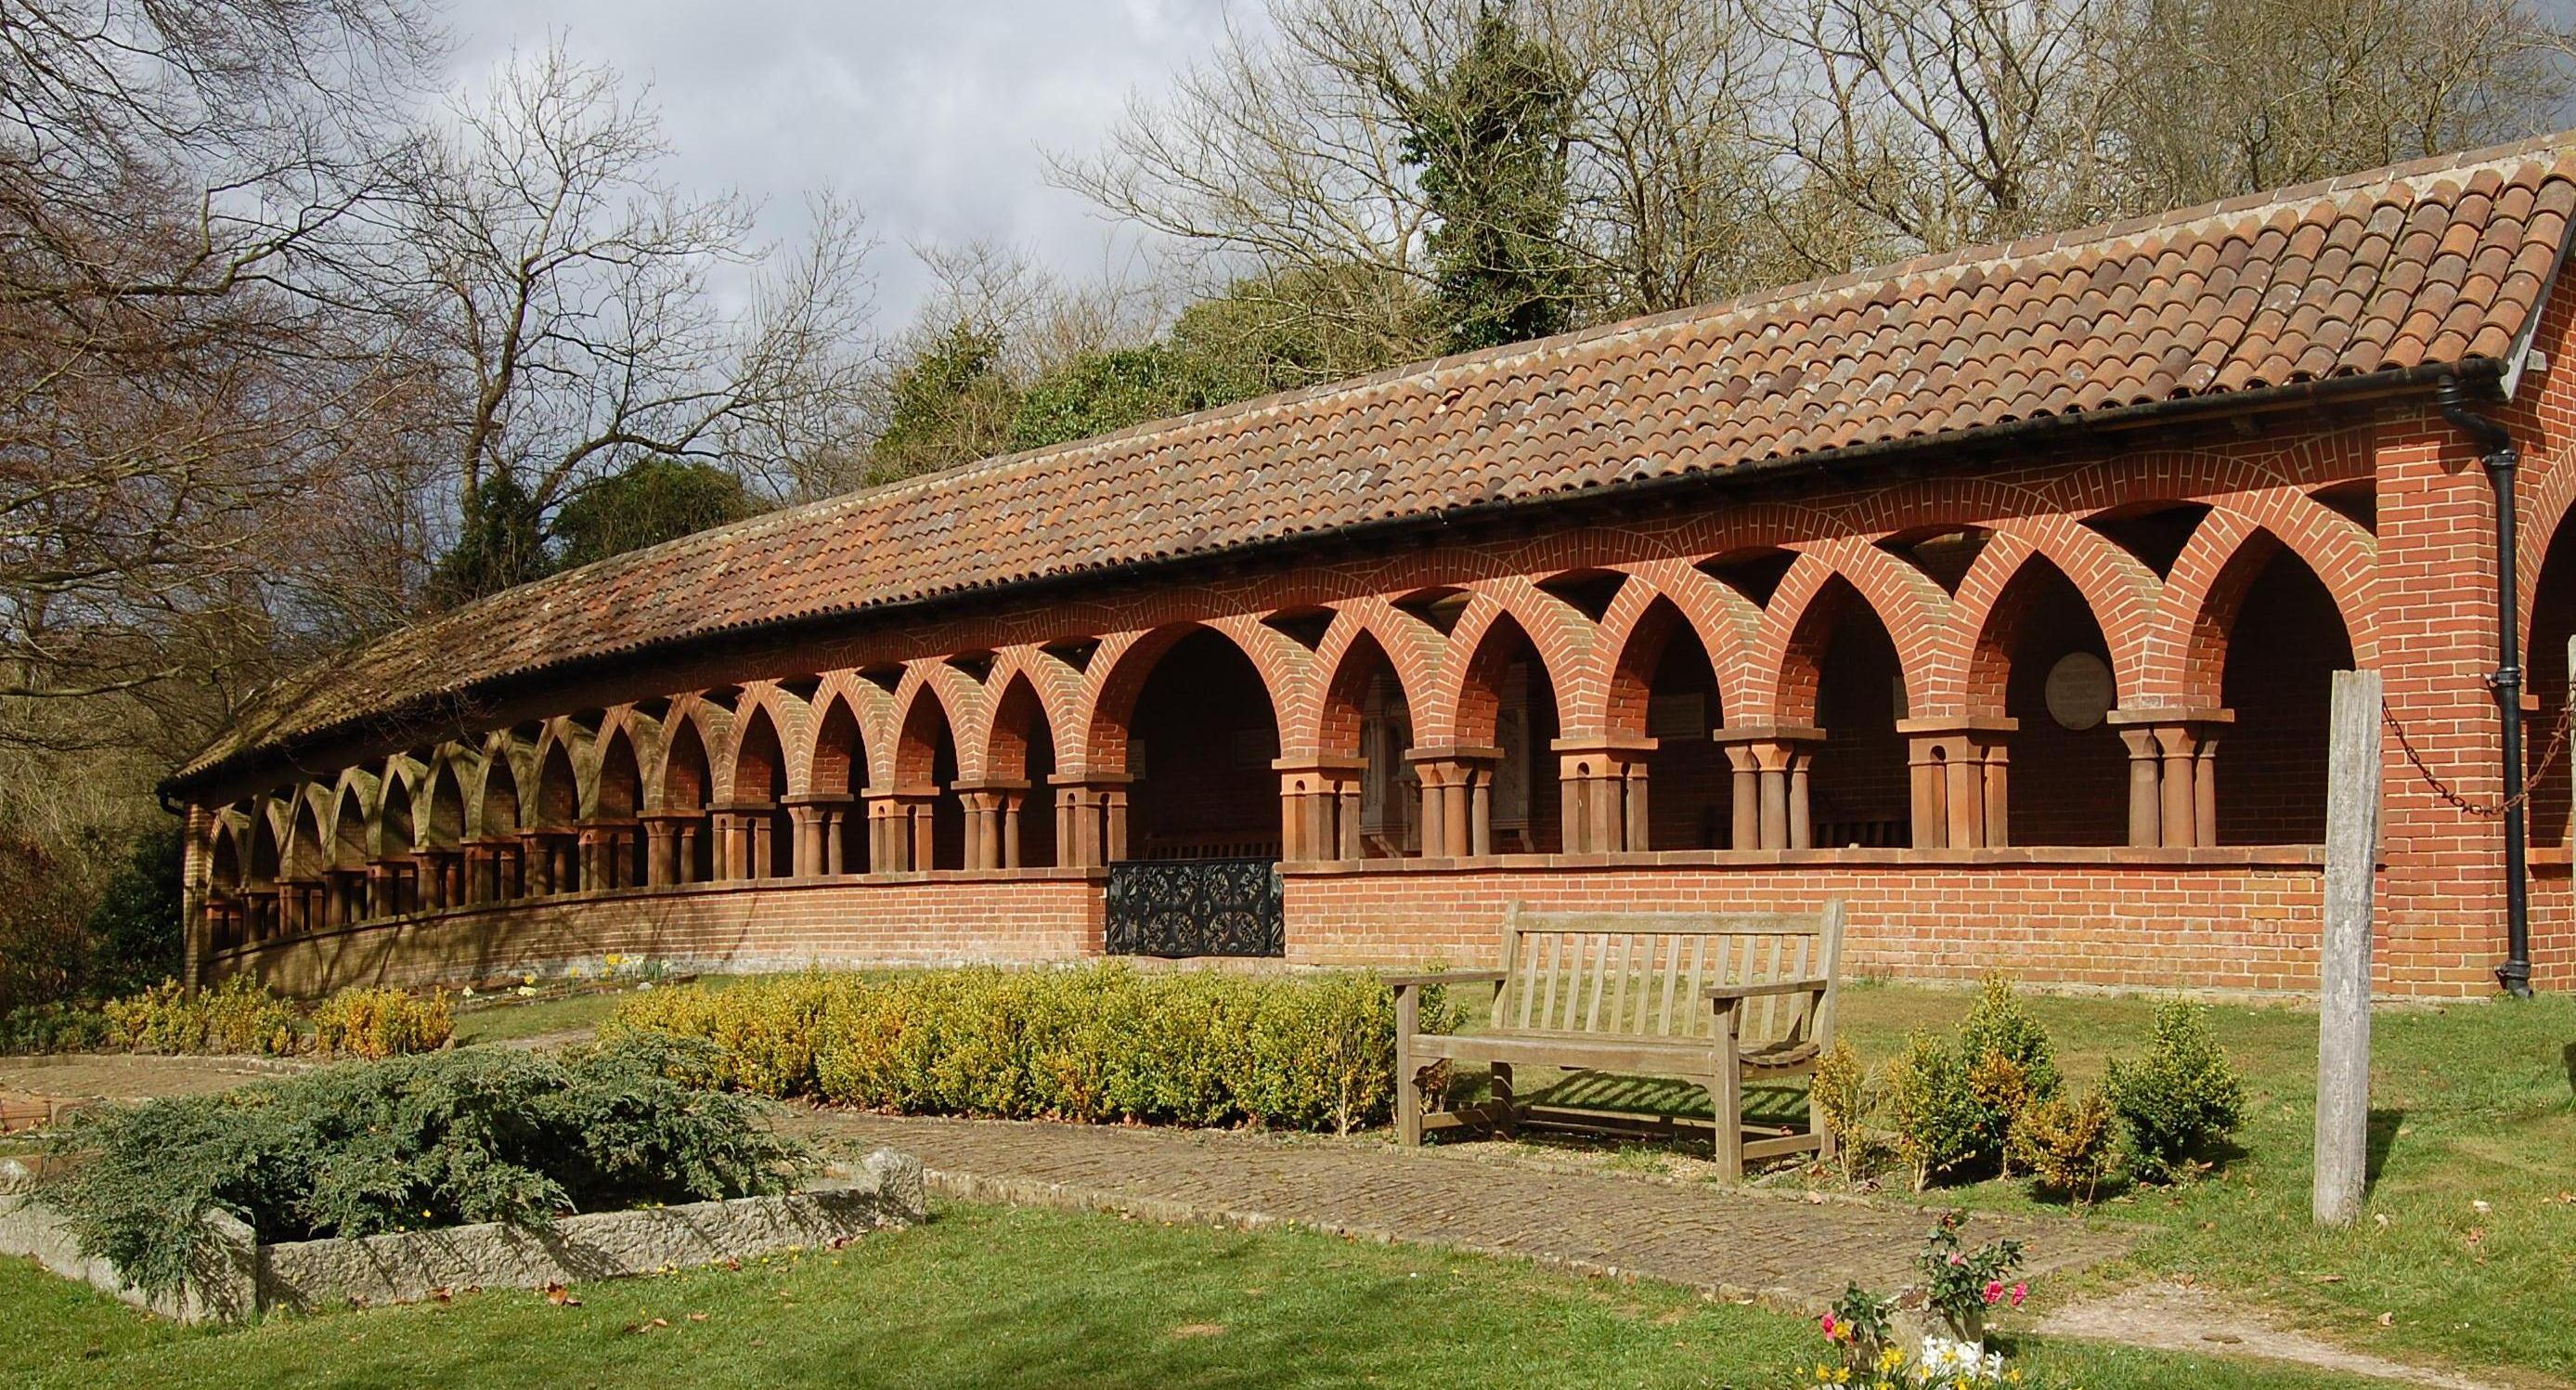 The Watts Memorial Cloister, Compton, Surrey designed and built in 1911 by Mary Seton Watts in Italianate style. Listed Grade II.